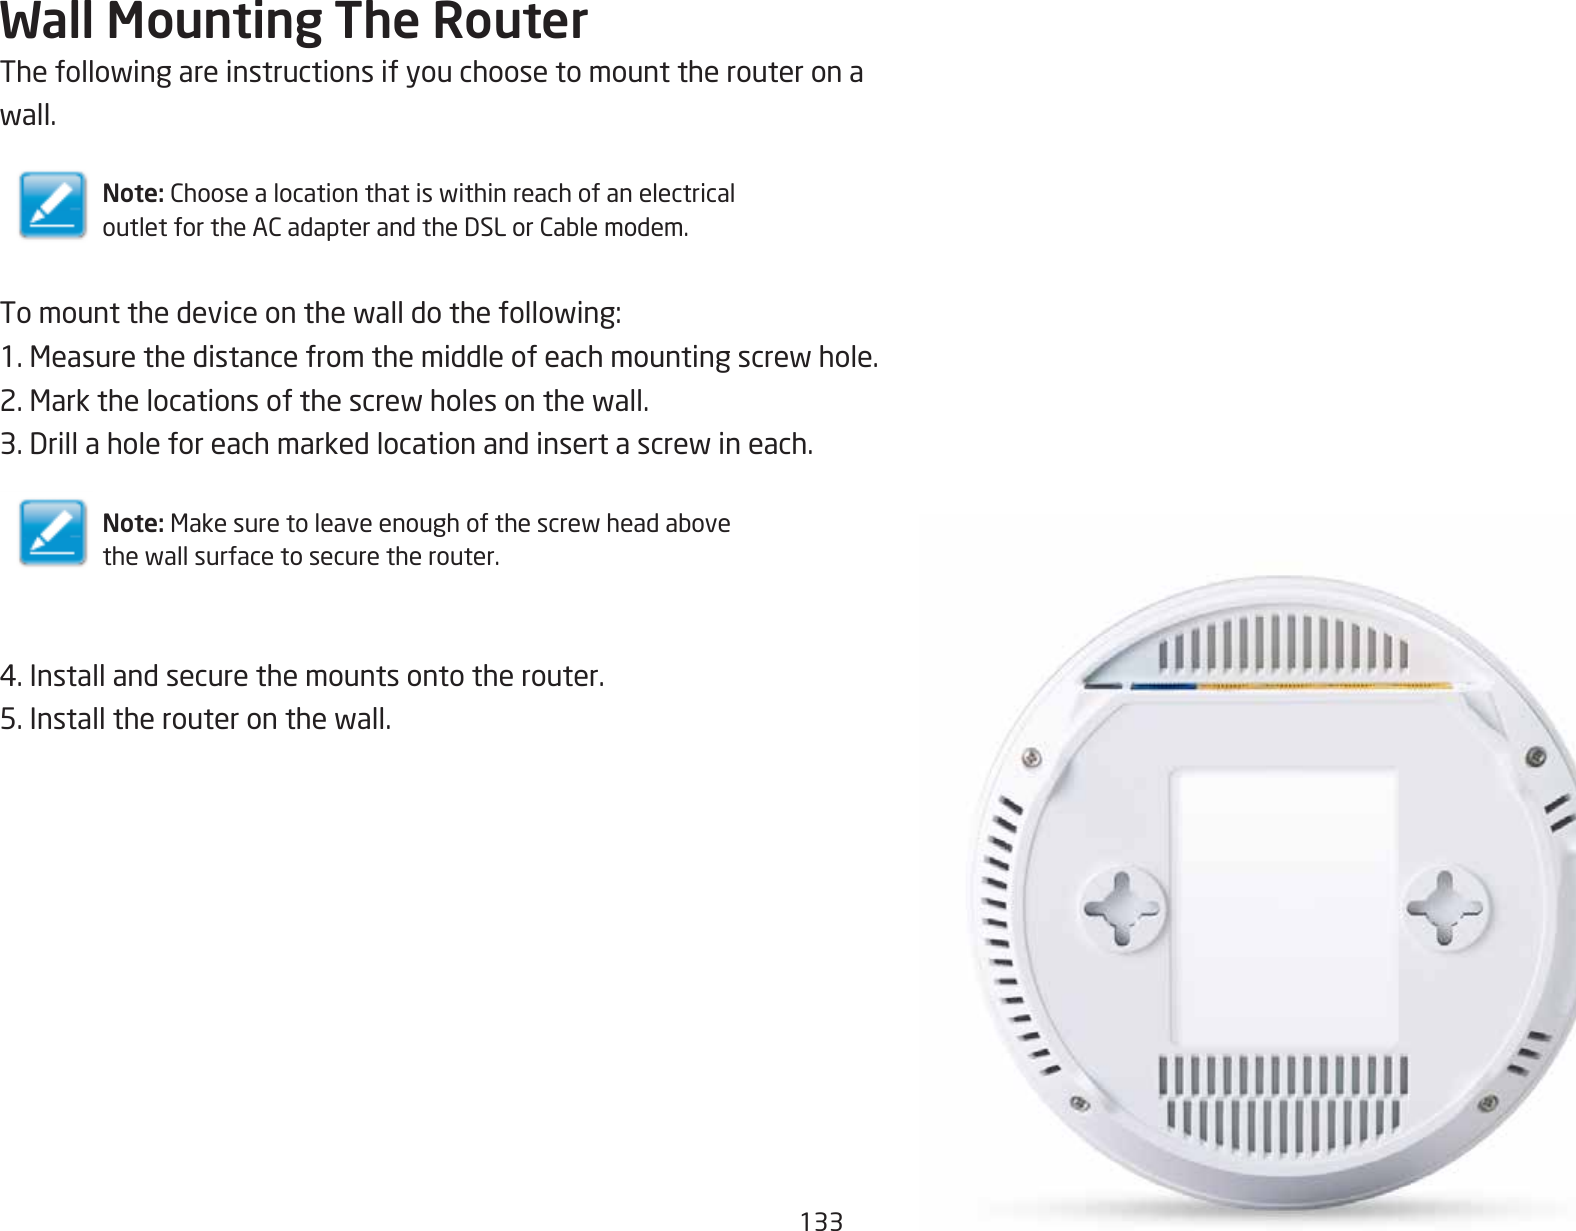 133Wall Mounting The RouterThefollowingareinstructionsifyouchoosetomounttherouteronawall.Note: ChoosealocationthatiswithinreachofanelectricaloutletfortheACadapterandtheDSLorCablemodem.Tomountthedeviceonthewalldothefollowing:1.Measurethedistancefromthemiddleofeachmountingscrewhole.2.Markthelocationsofthescrewholesonthewall.3.Drillaholeforeachmarkedlocationandinsertascrewineach.Note: Makesuretoleaveenoughofthescrewheadabovethewallsurfacetosecuretherouter.4.Installandsecurethemountsontotherouter.5.Installtherouteronthewall.